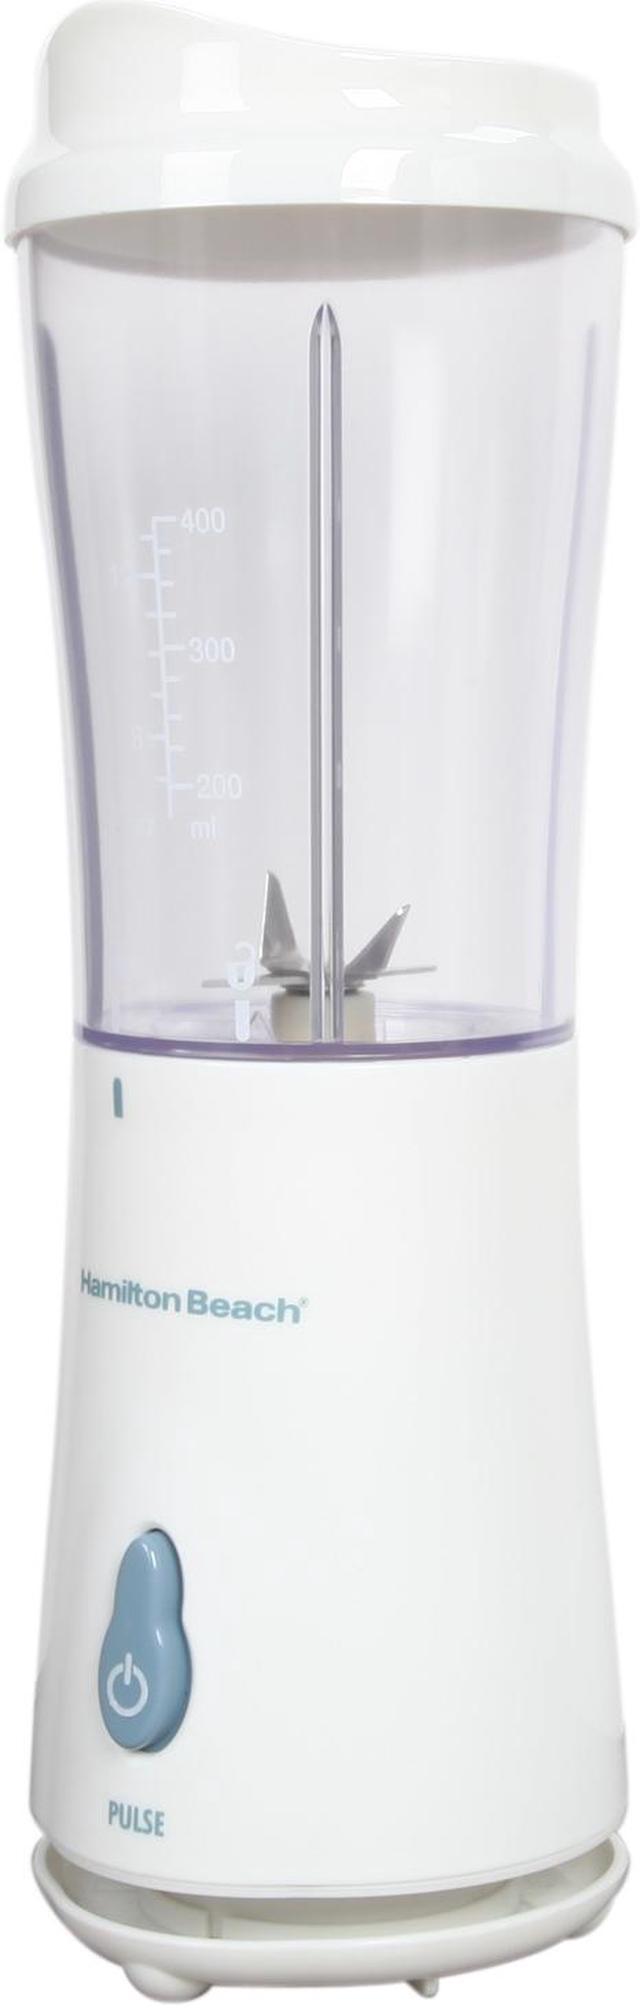 Hamilton Beach Personal Blender with Travel Lid for Smoothies and Shakes,  Portable, Fits Most Car Cup Holders, Black, 51101 